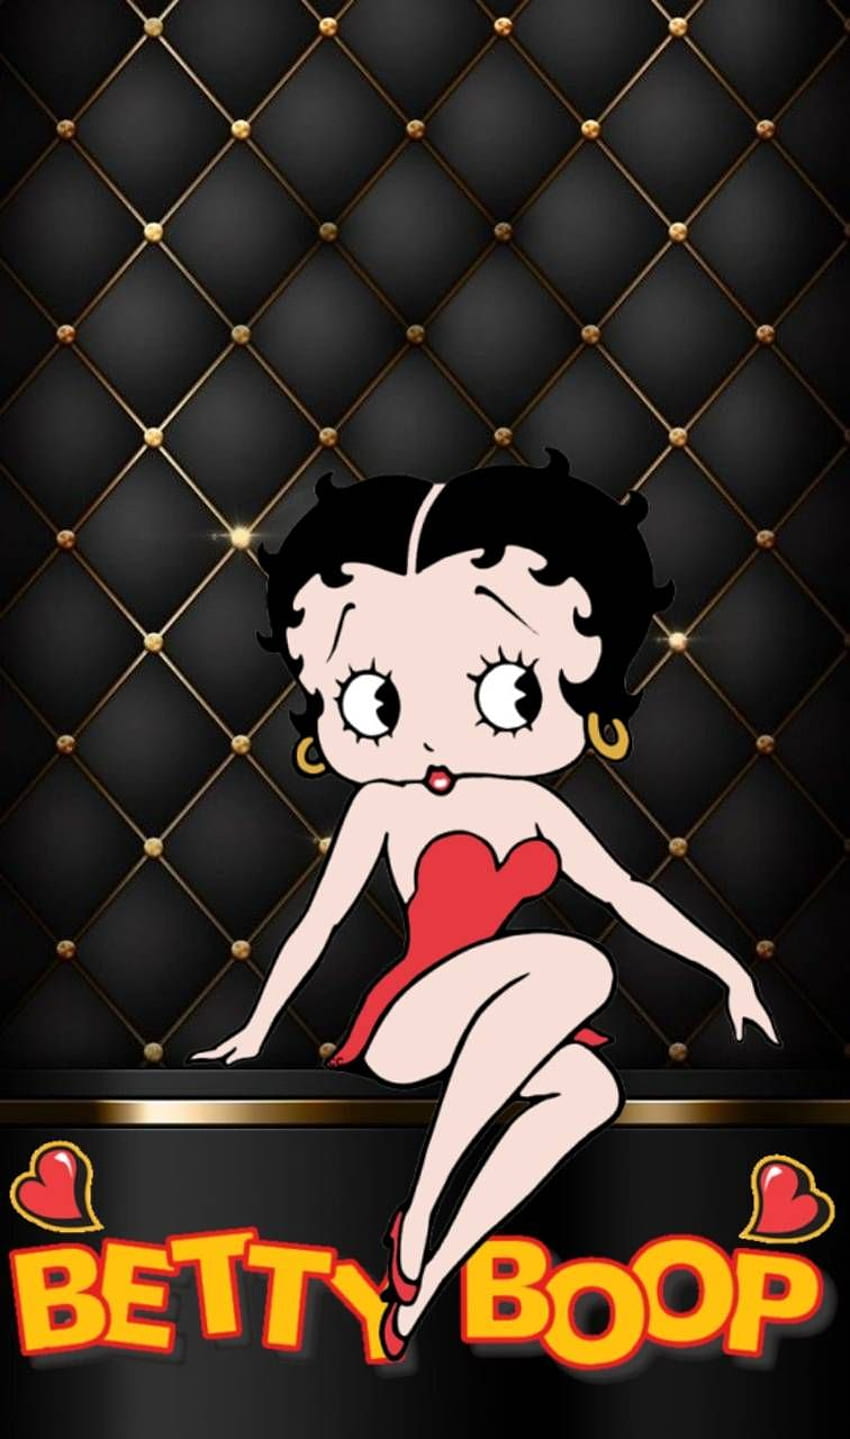 Betty boop by Glendalizz69 - e1 now. Browse millions of popular betty. Betty boop art, Betty boop , Betty boop quotes HD phone wallpaper